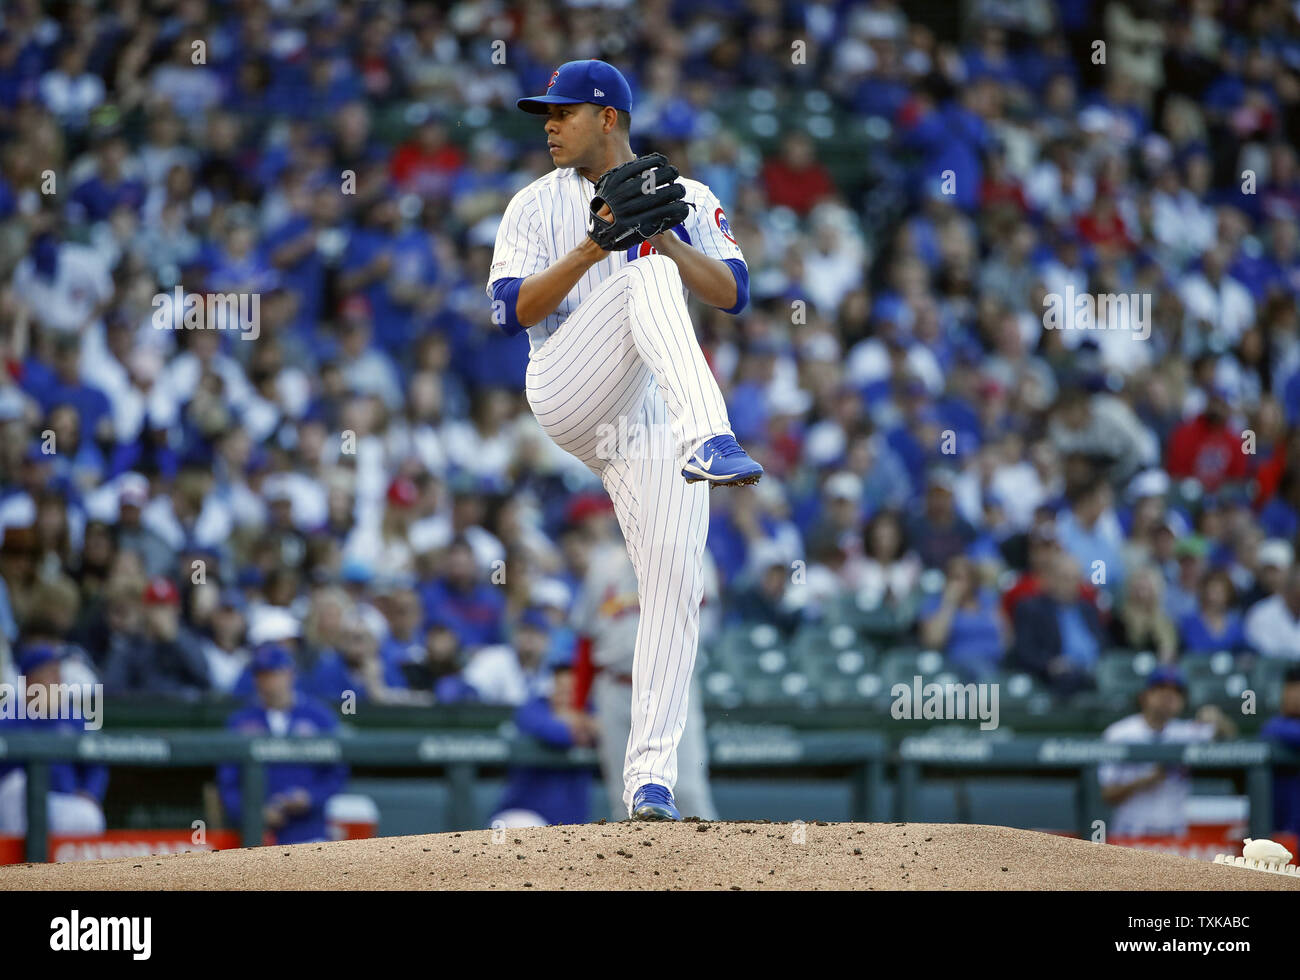 Chicago Cubs starting pitcher Jose Quintana delivers against the St. Louis Cardinals in the first inning at Wrigley Field on May 5, 2019 in Chicago. Photo by Kamil Krzaczynski/UPI Stock Photo